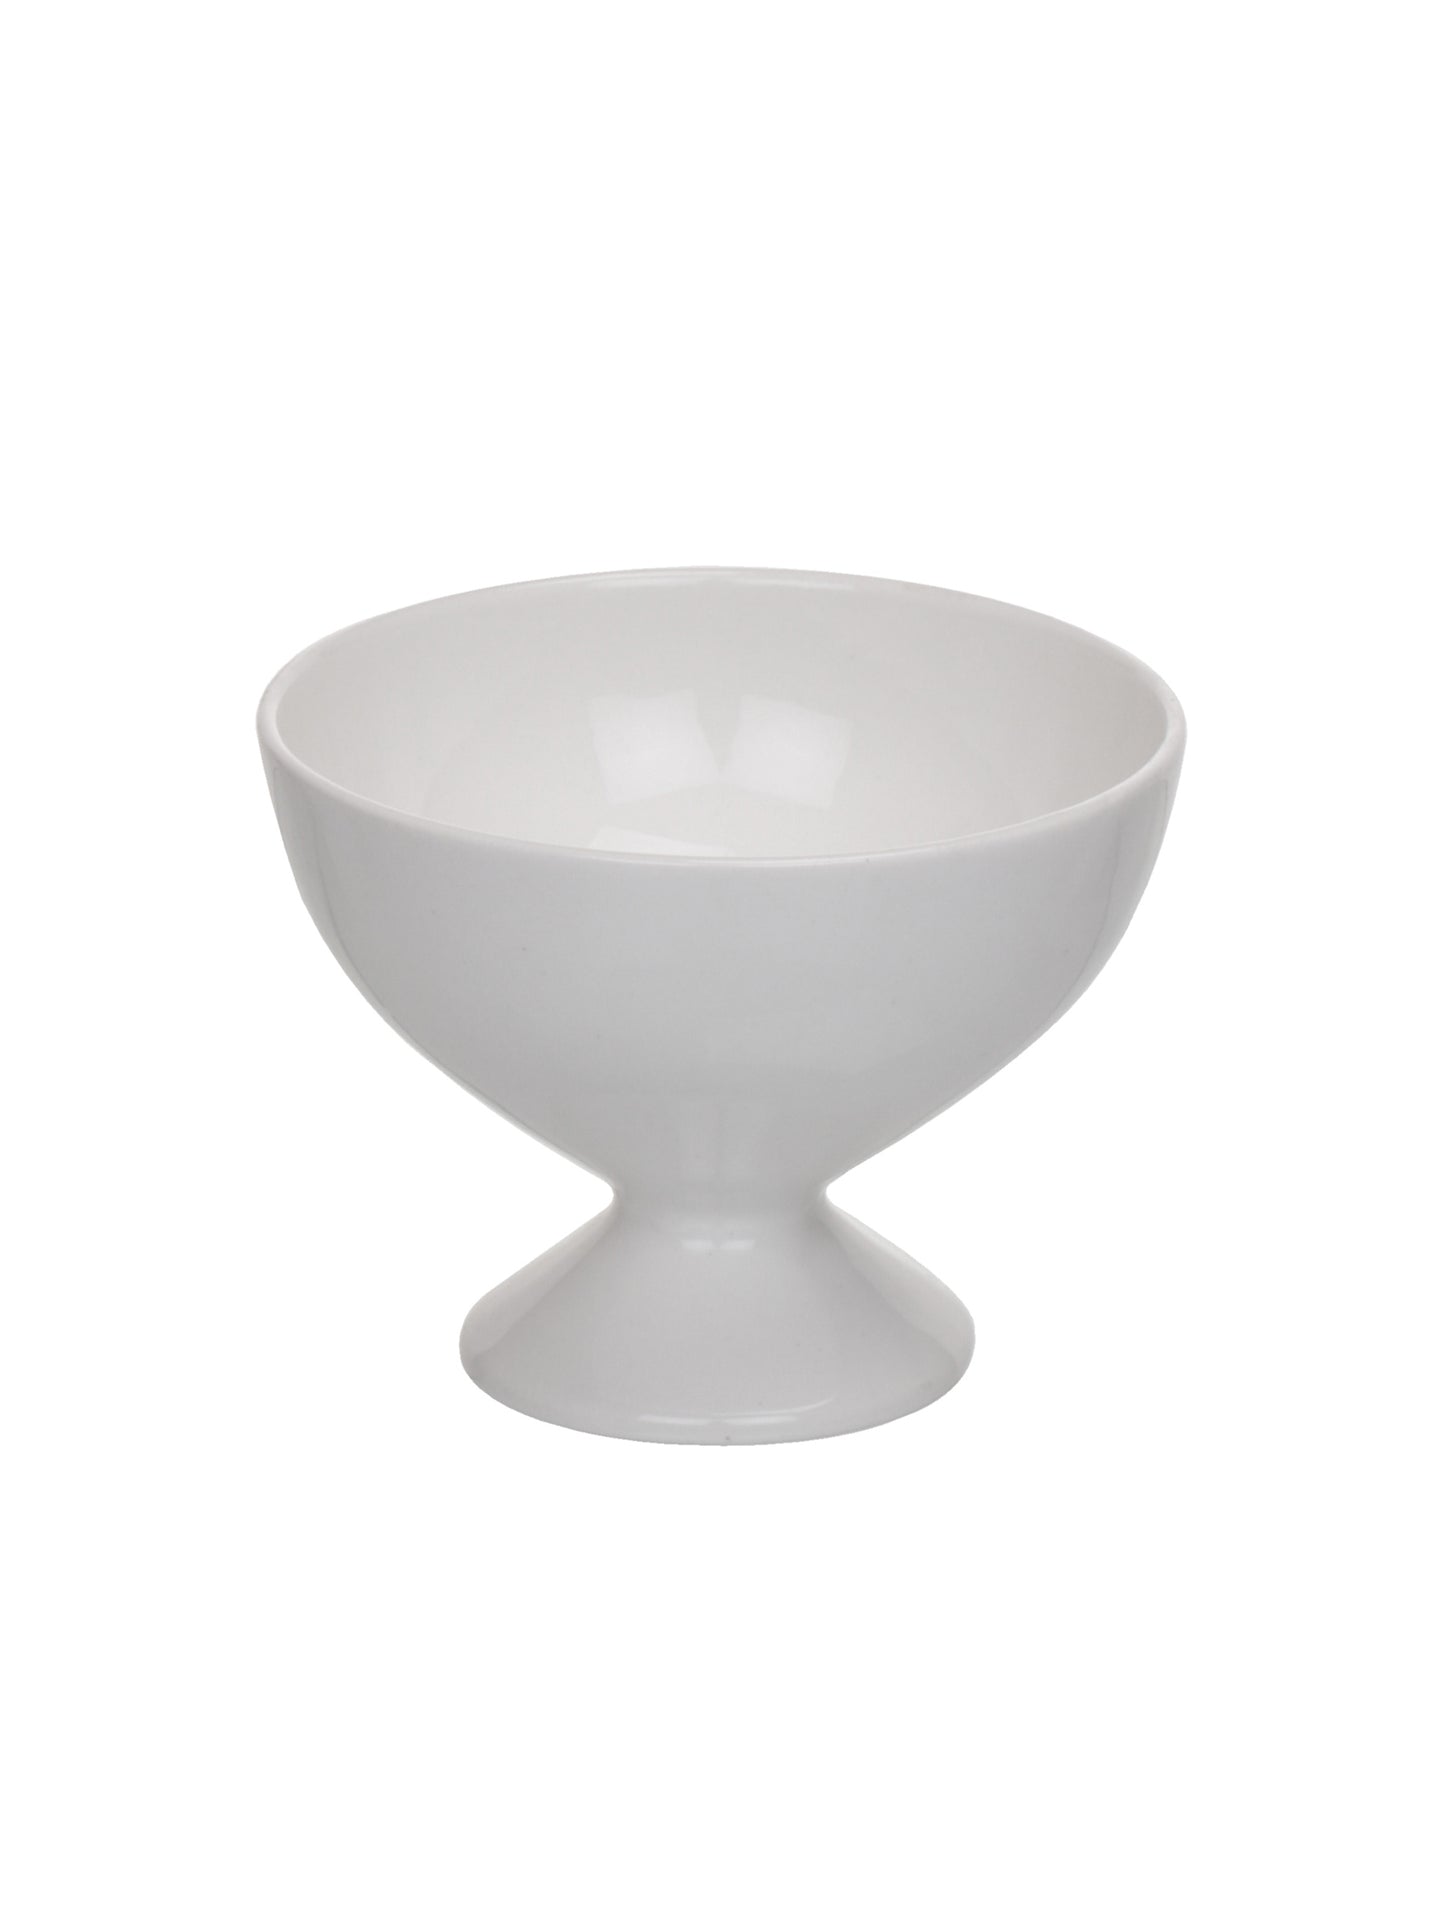 Clay Craft Plain White Solid Ice Cream Bowls Set of 4 - 150 ml each